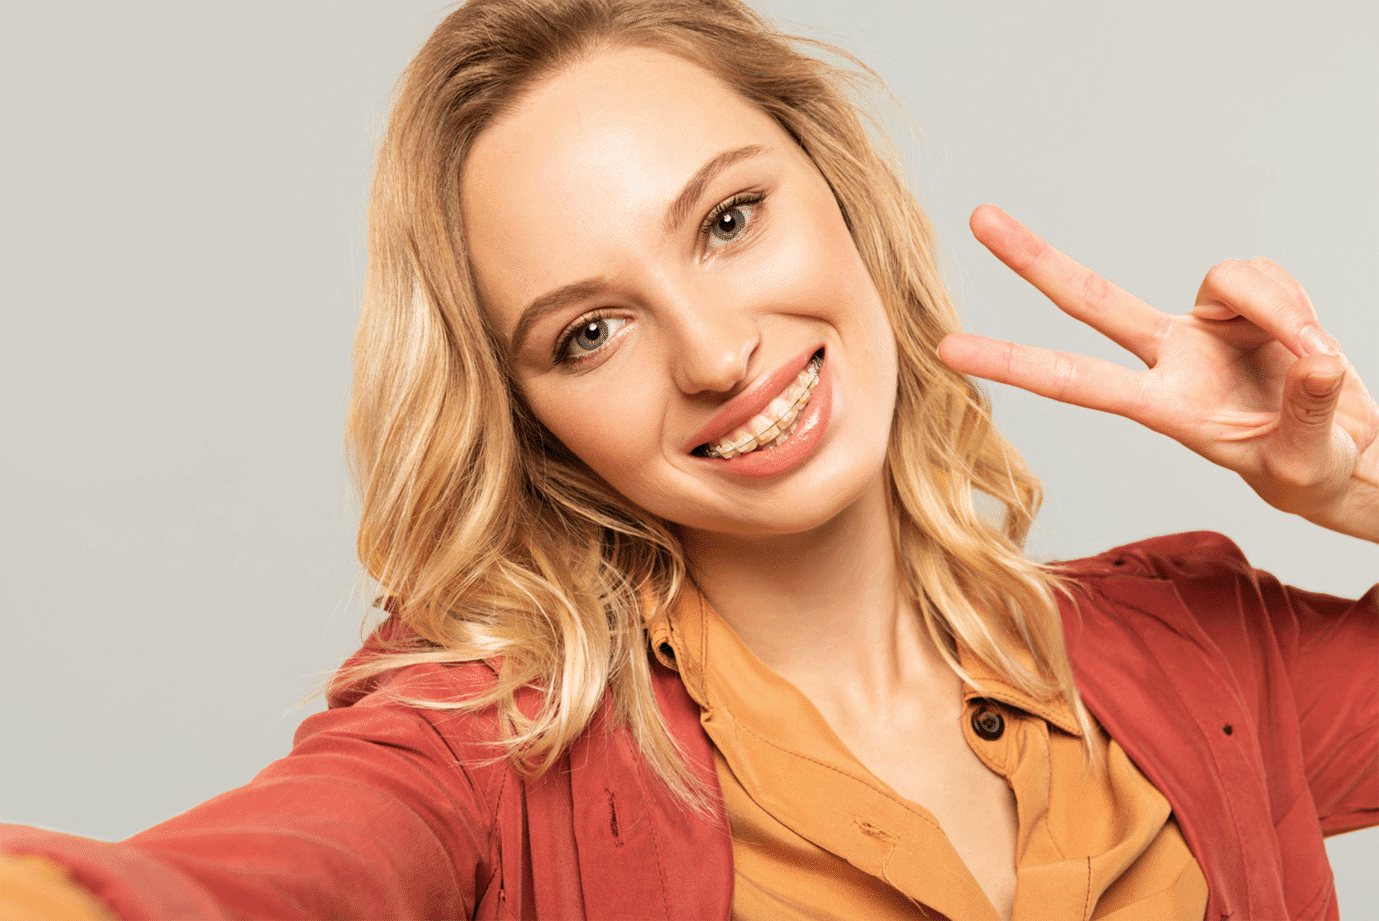 A young woman making a peace sign with her hands.